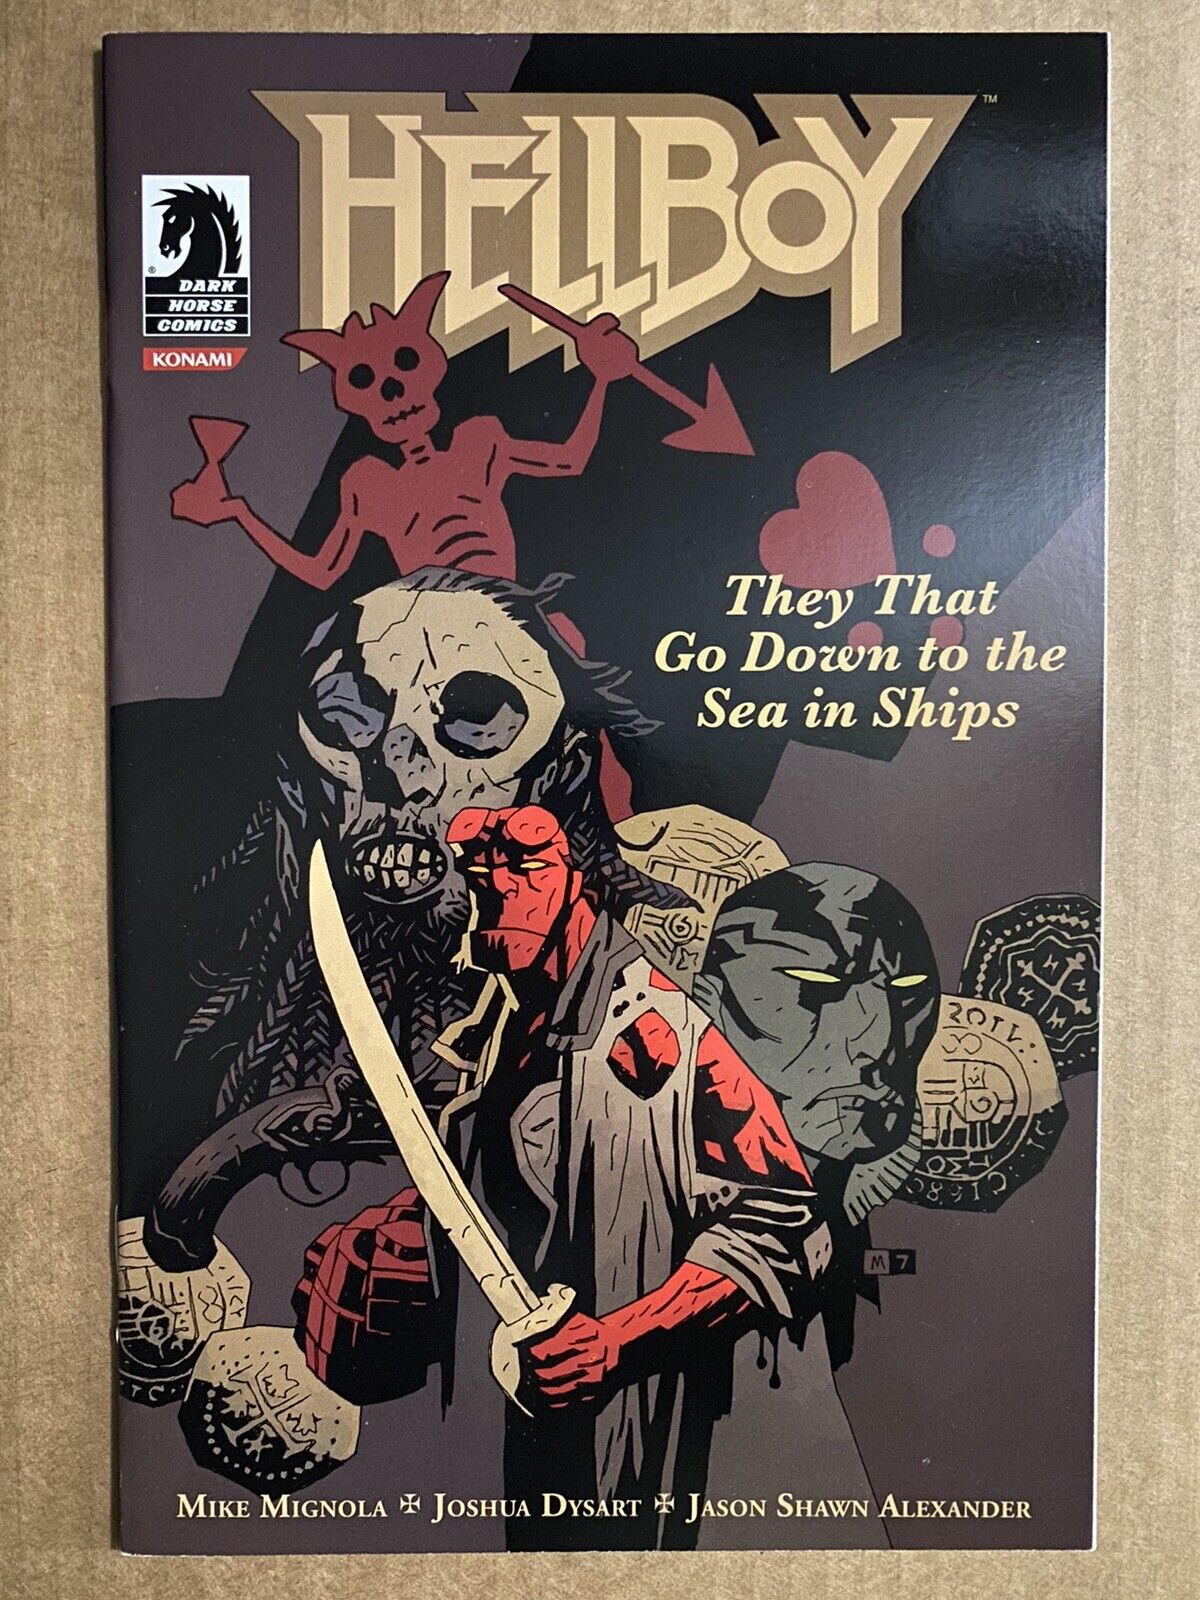 Hellboy They That Go Down To The Sea In Ships #1 Konami NYCC Variant Comic Book